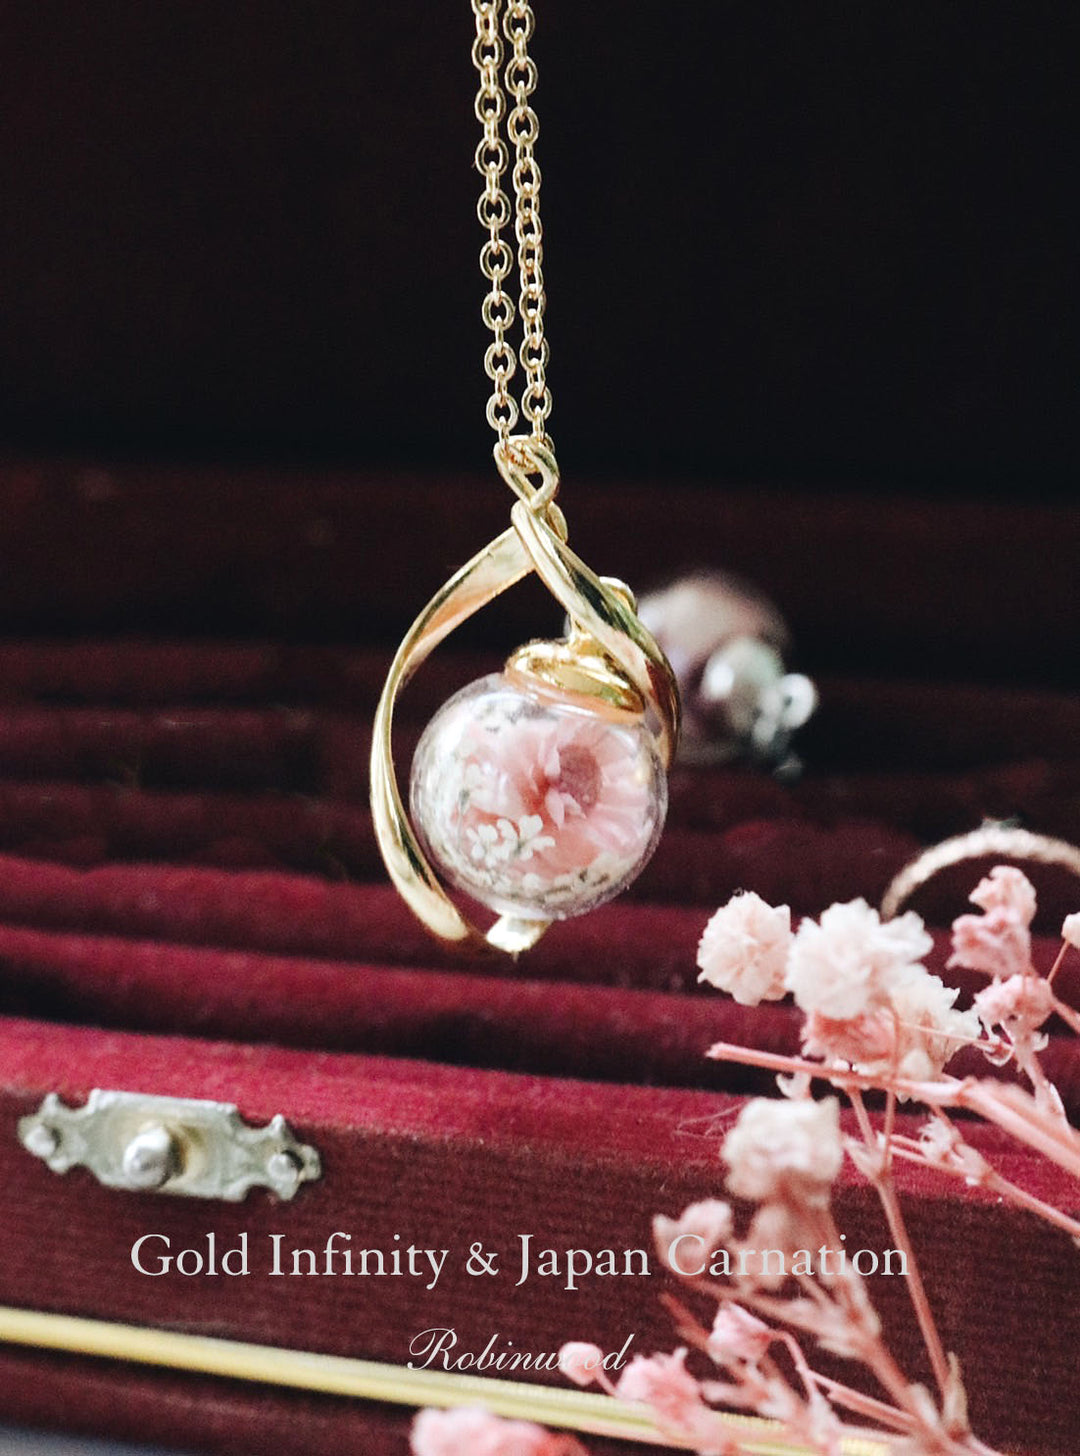 July Collection's " Japan Carnation Gold Infinity, Necklace Series, Robinwood